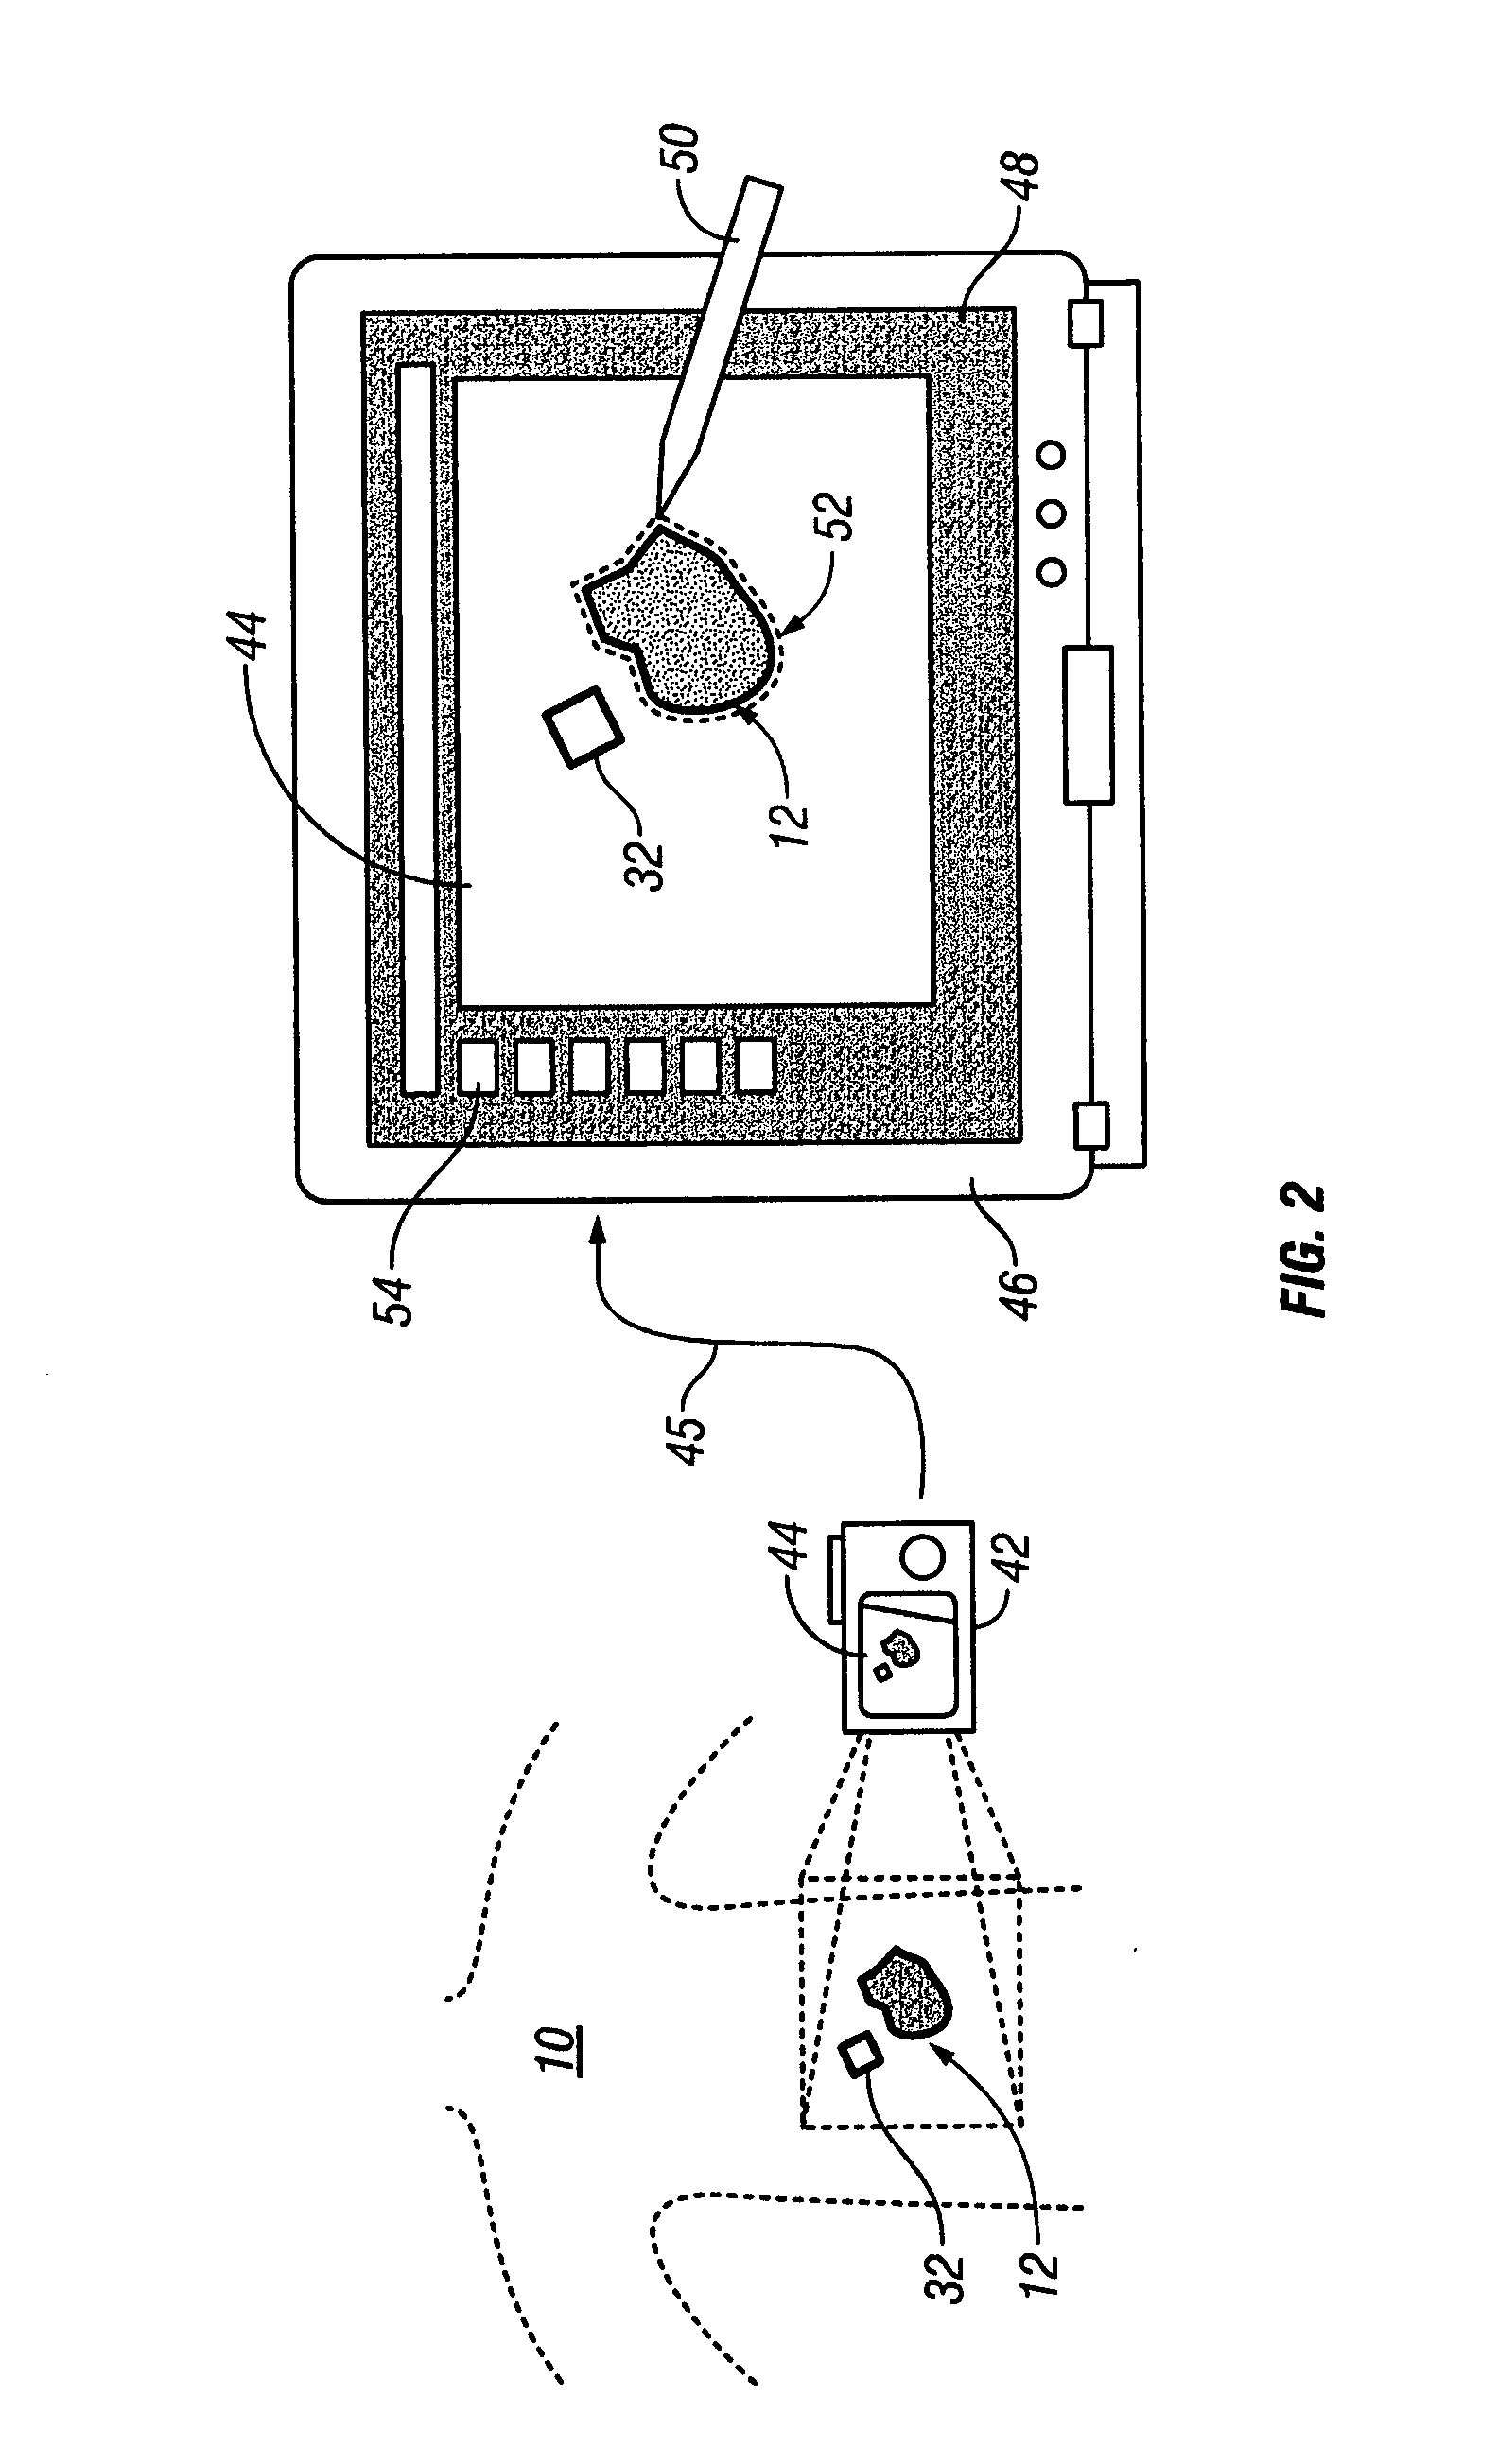 System and method for tracking healing progress of a wound